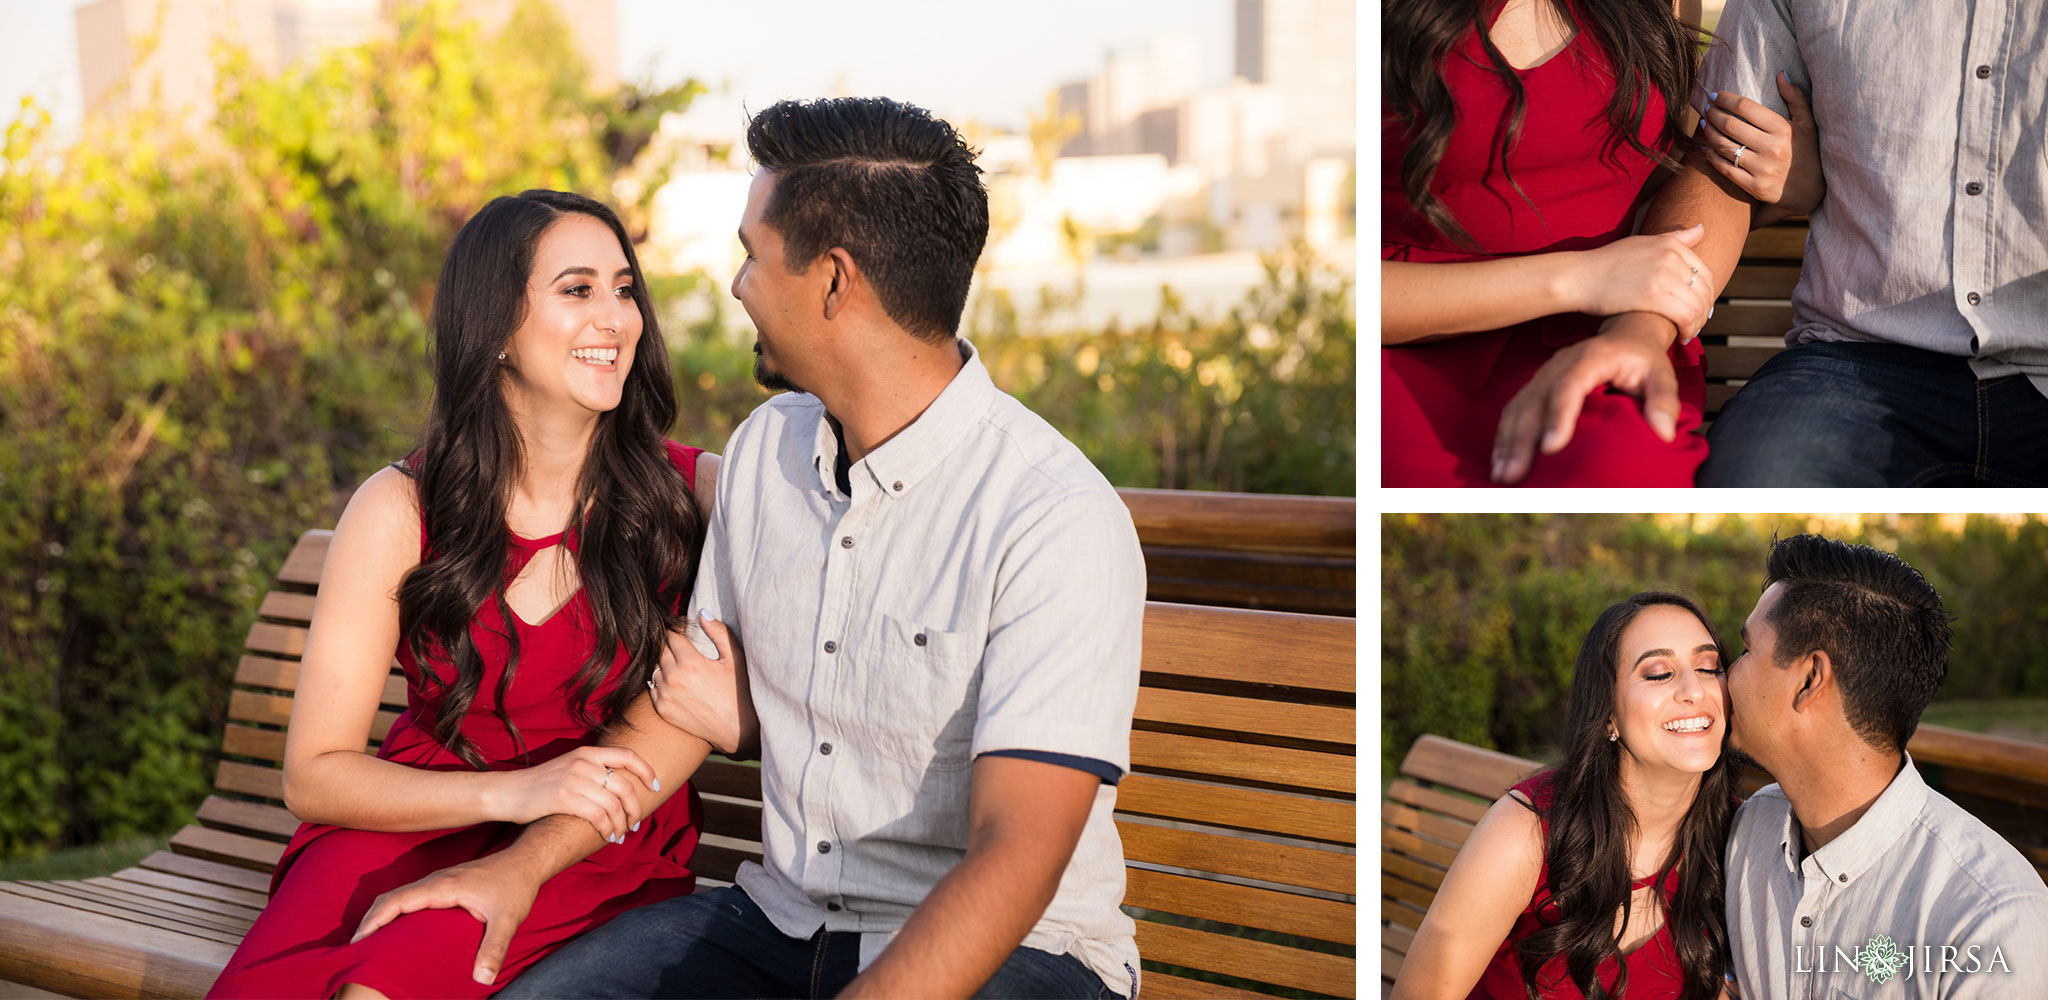 15 downtown los angeles engagement photography